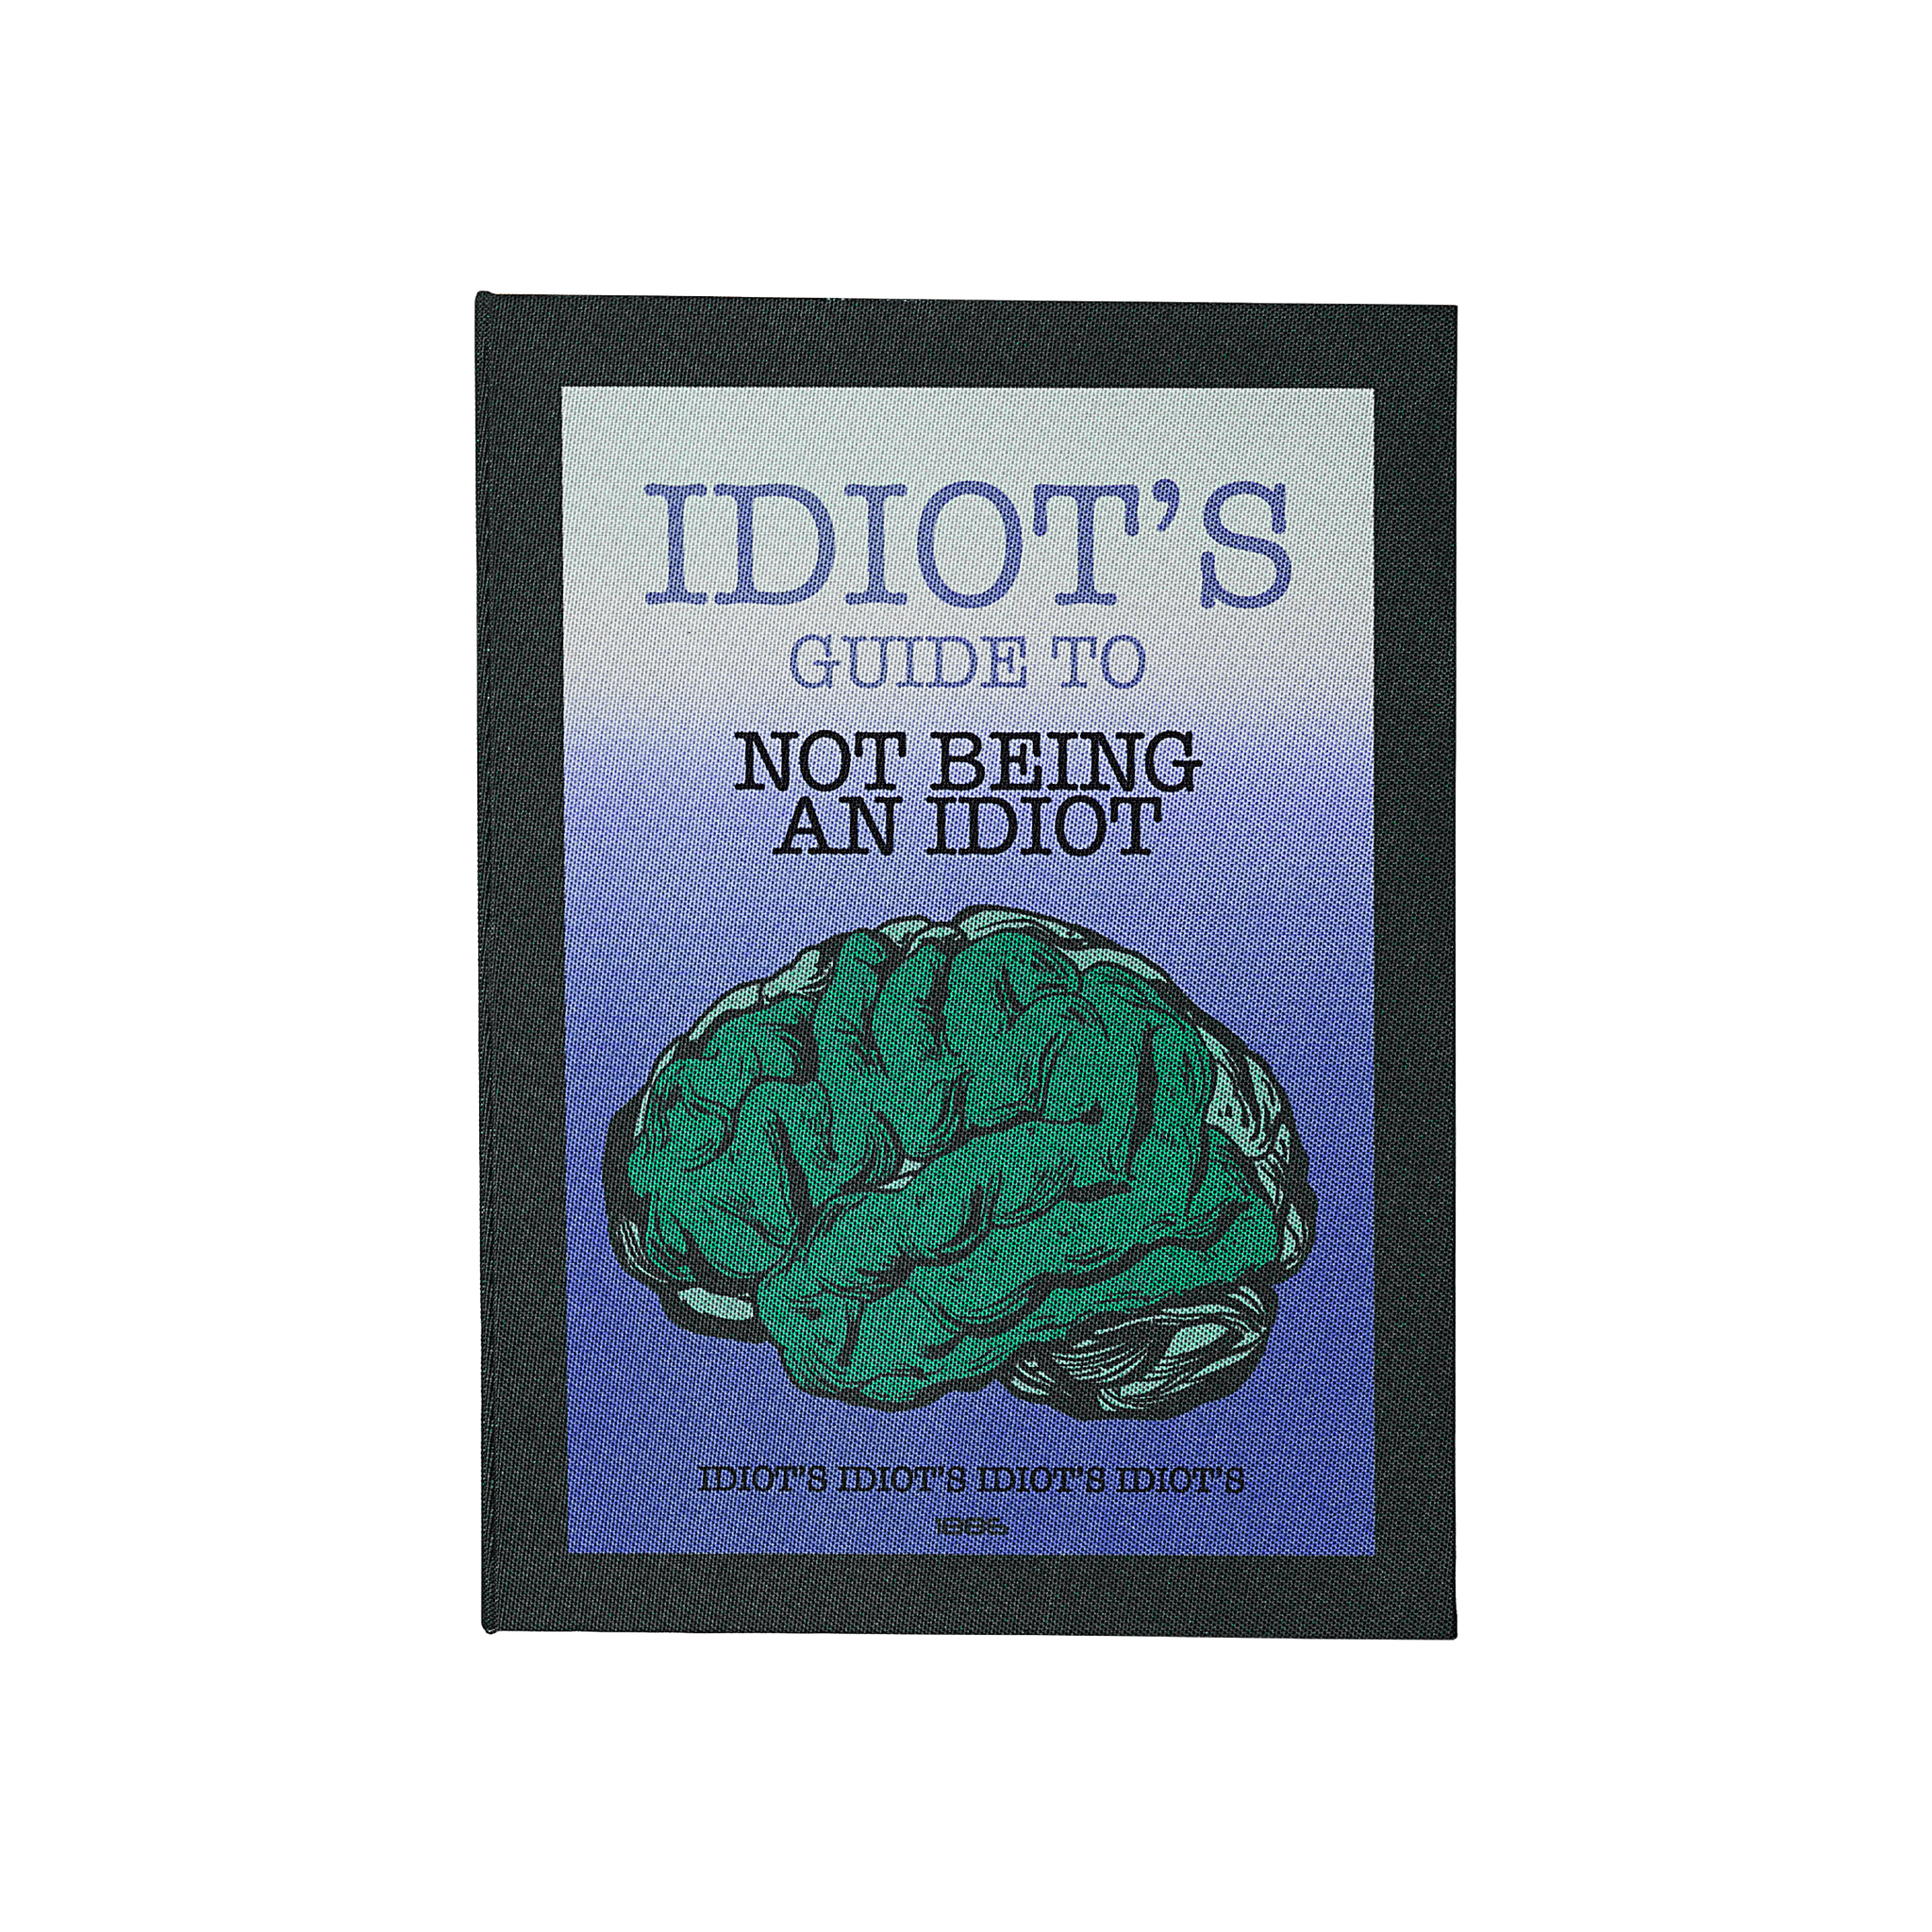 Idiot's guide to not being an idiot" Book